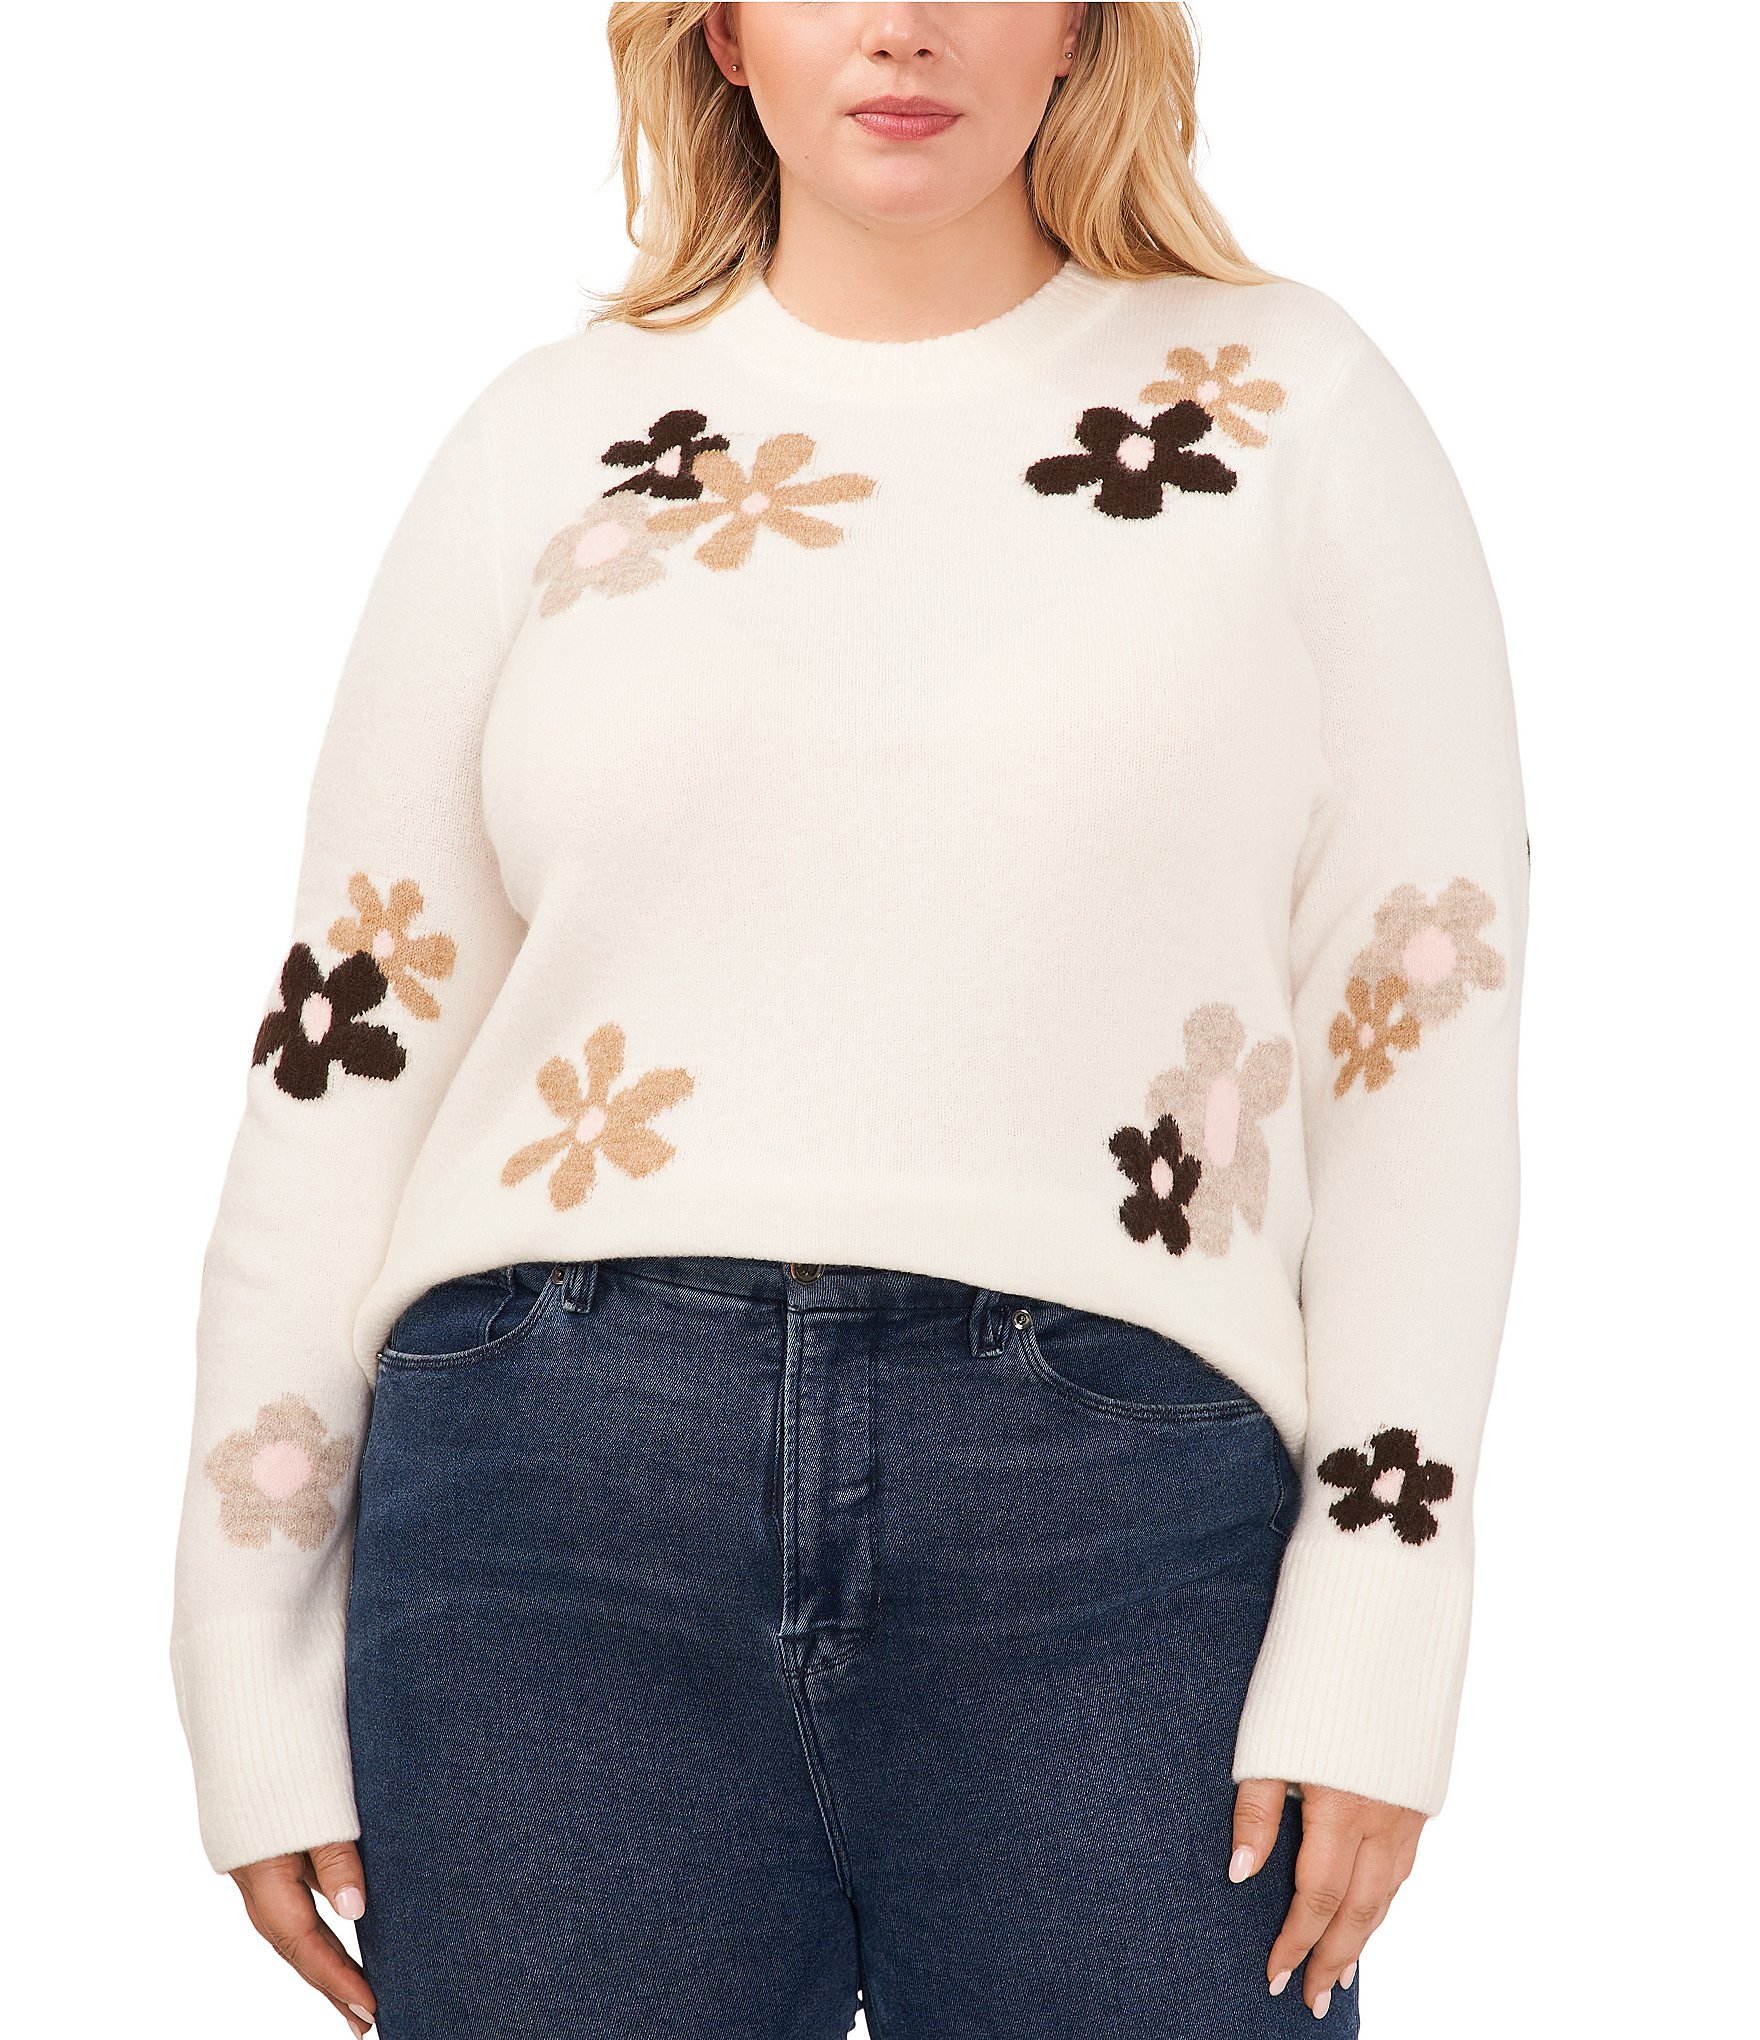 CeCe Plus Size Floral Intarsia Long Sleeve Crew Neck Sweater